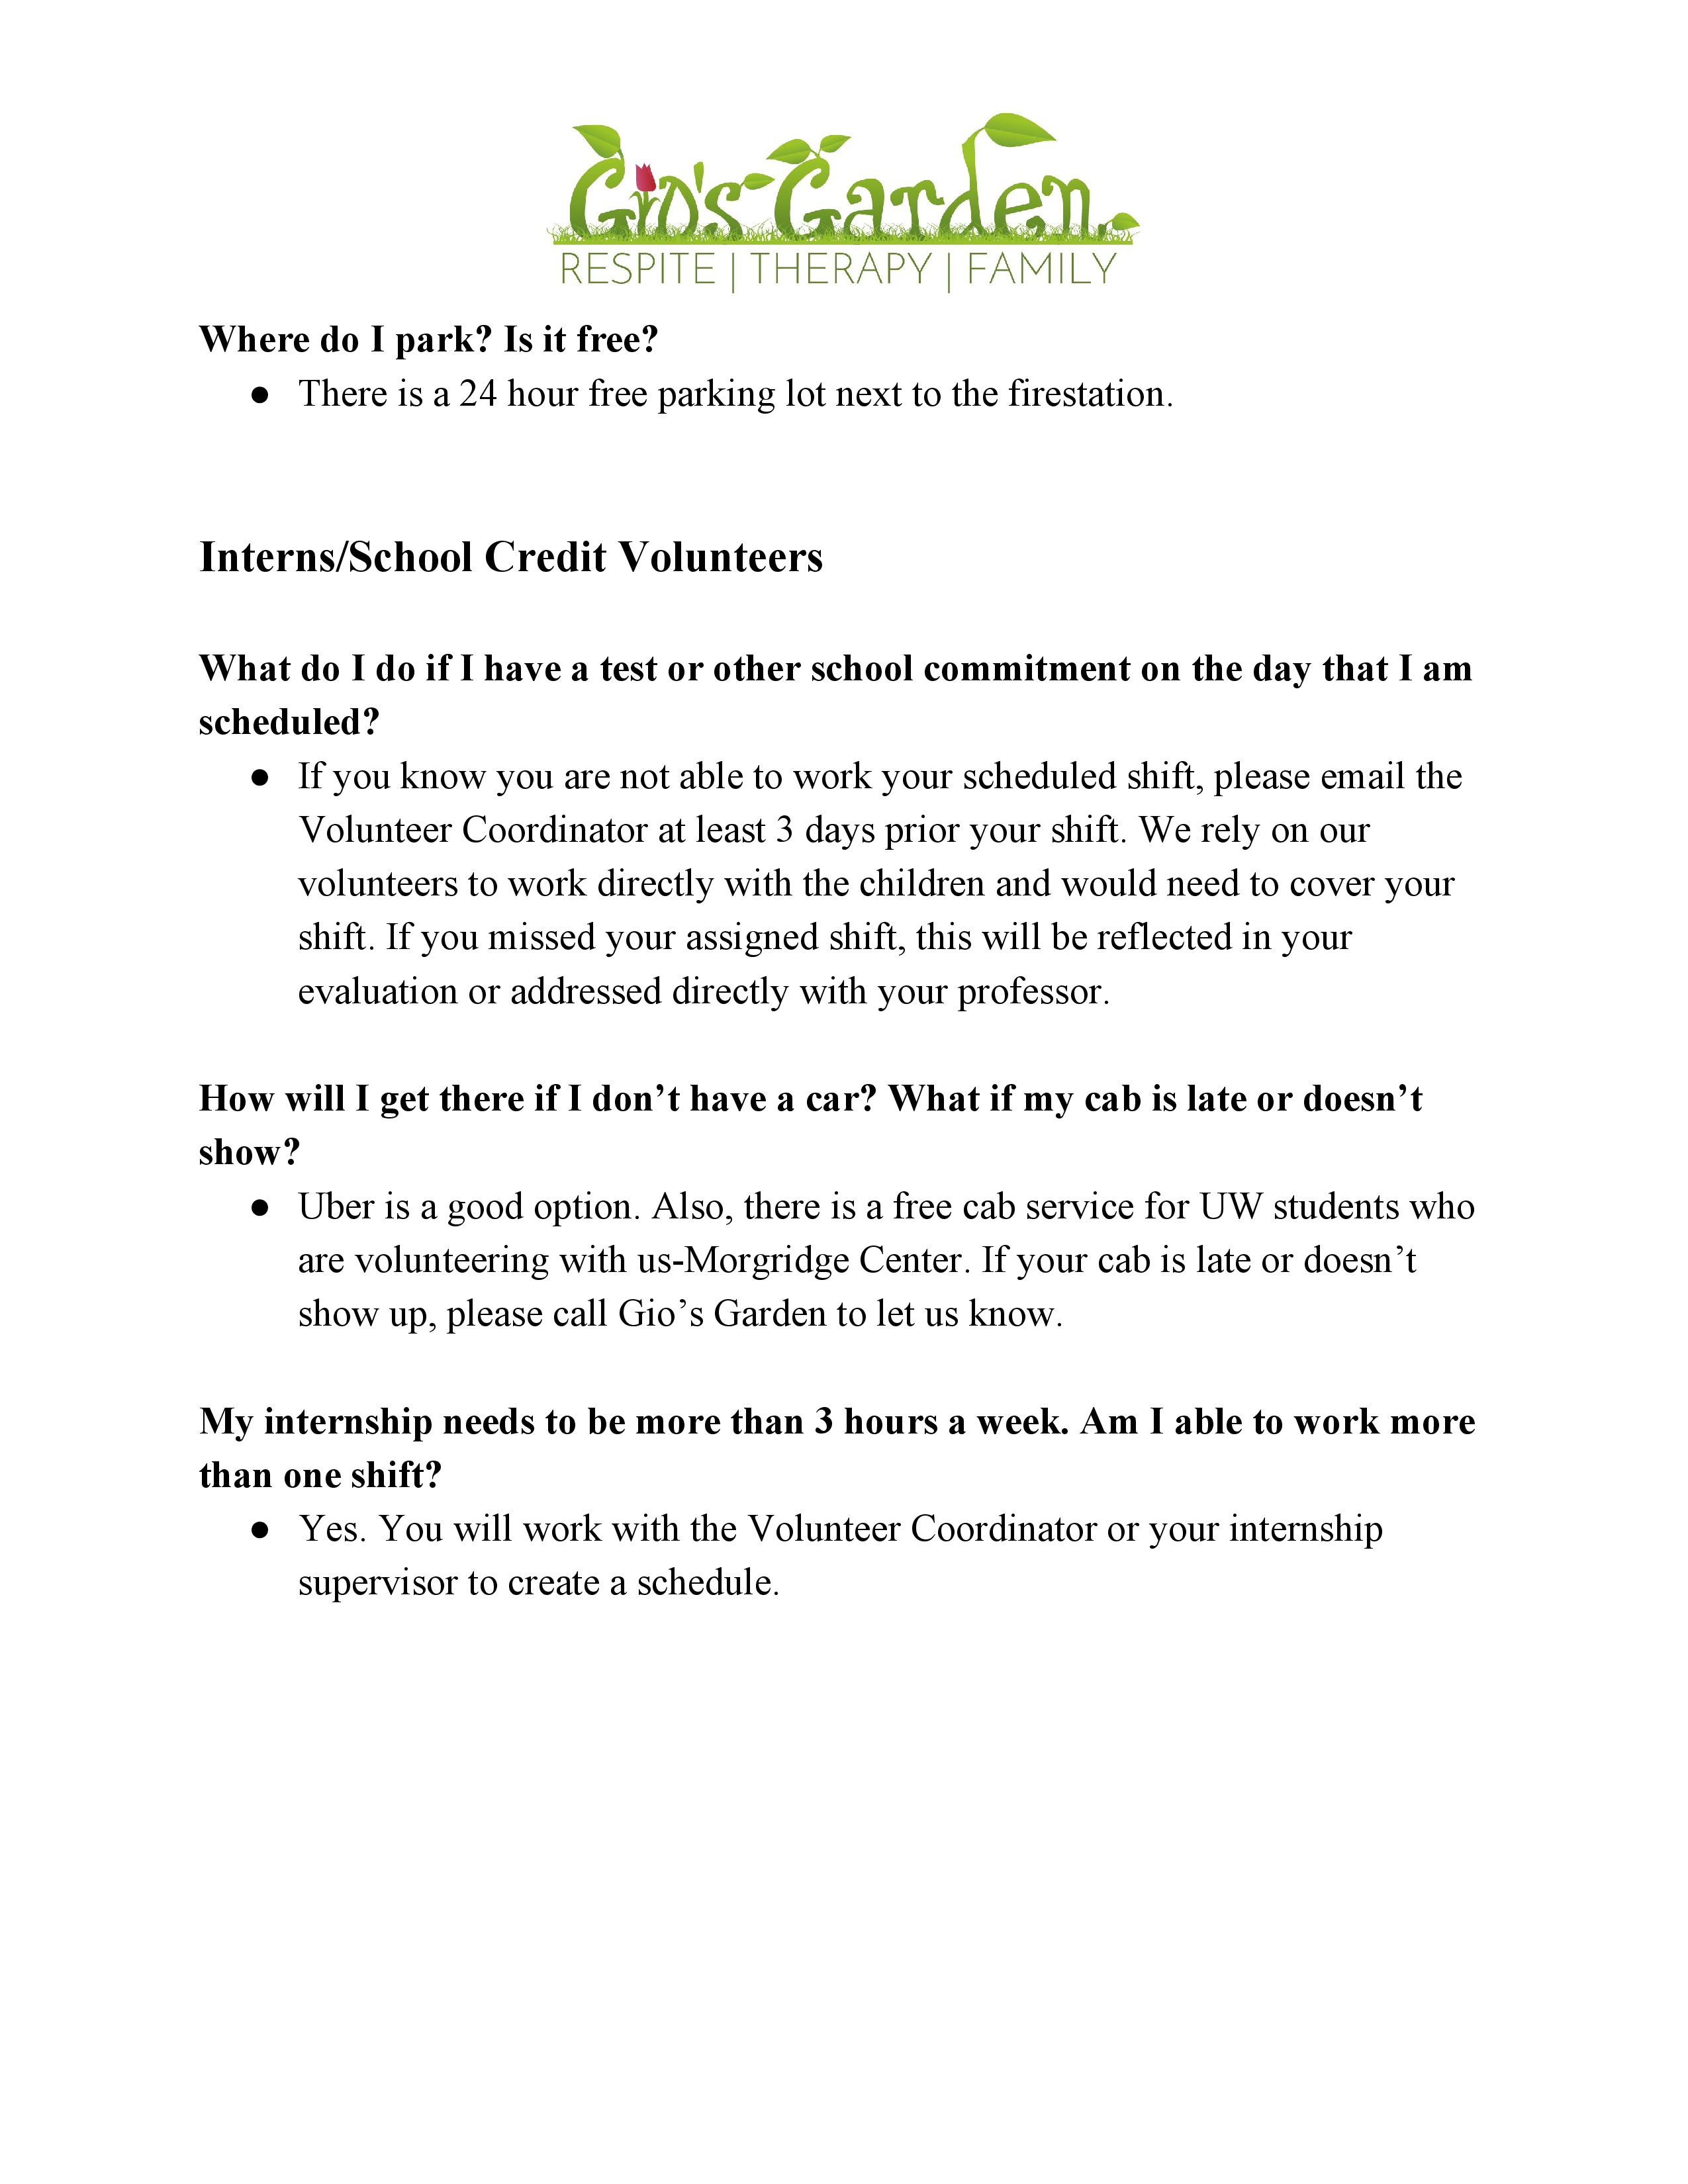 FAQS for Volunteers_Interns-page-2